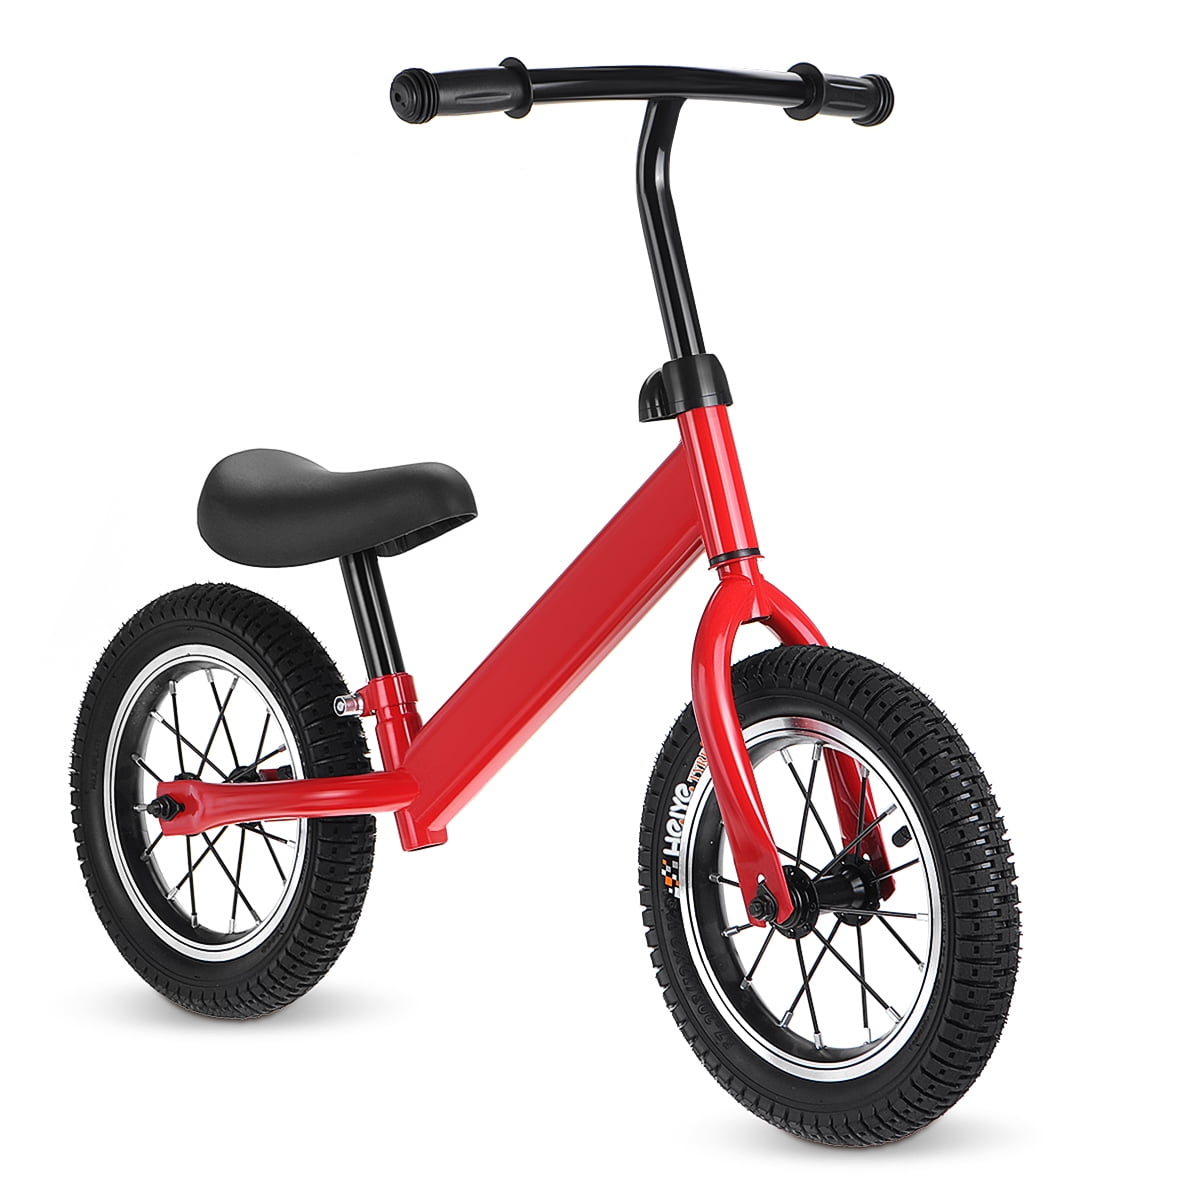 Details about   US Children Balance Bike Kid No-Pedal Learn To Ride Kids Bicycle Adjustable Seat 